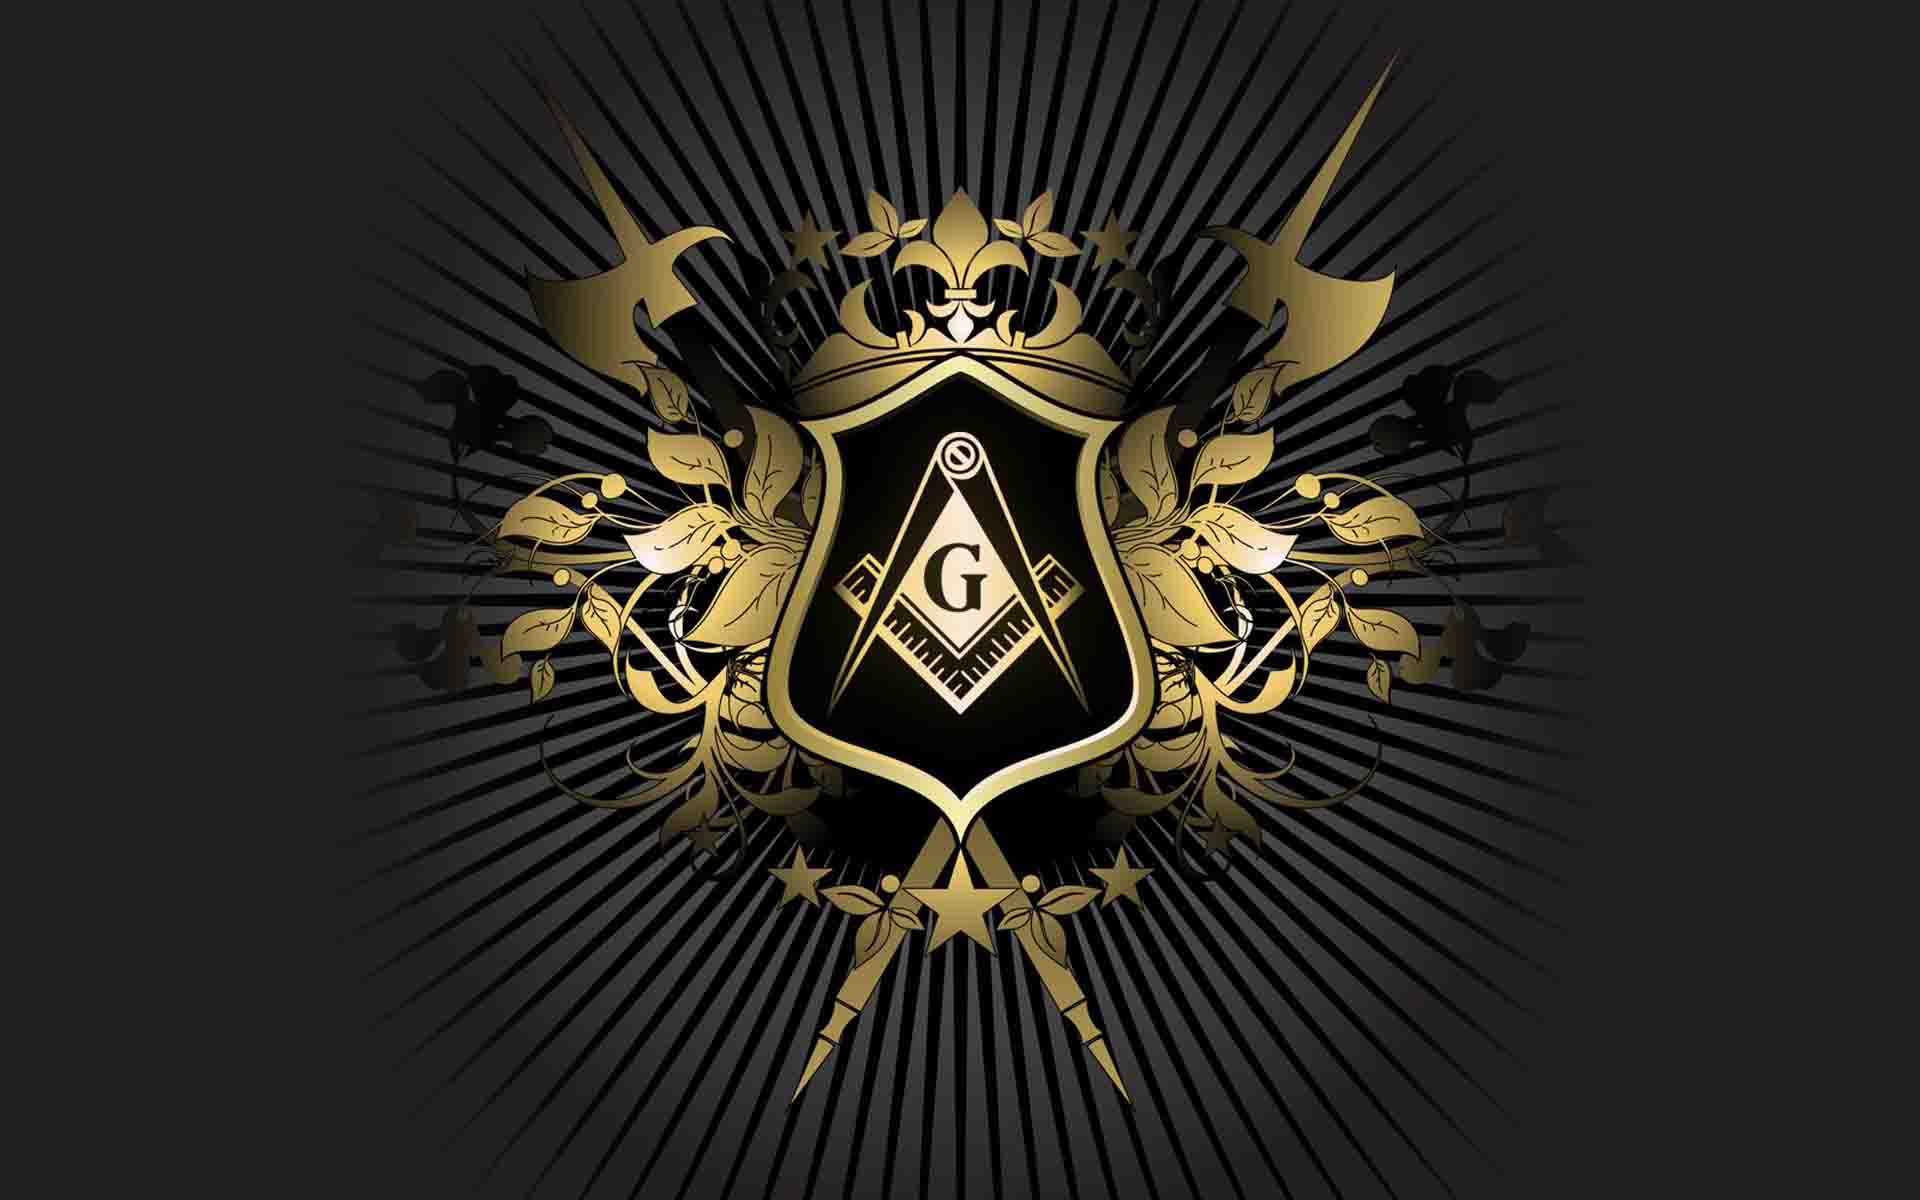 FraternalTies  Free HD Masonic wallpapers Printed posters also available  Click here  httpbitlymasonshd  Facebook